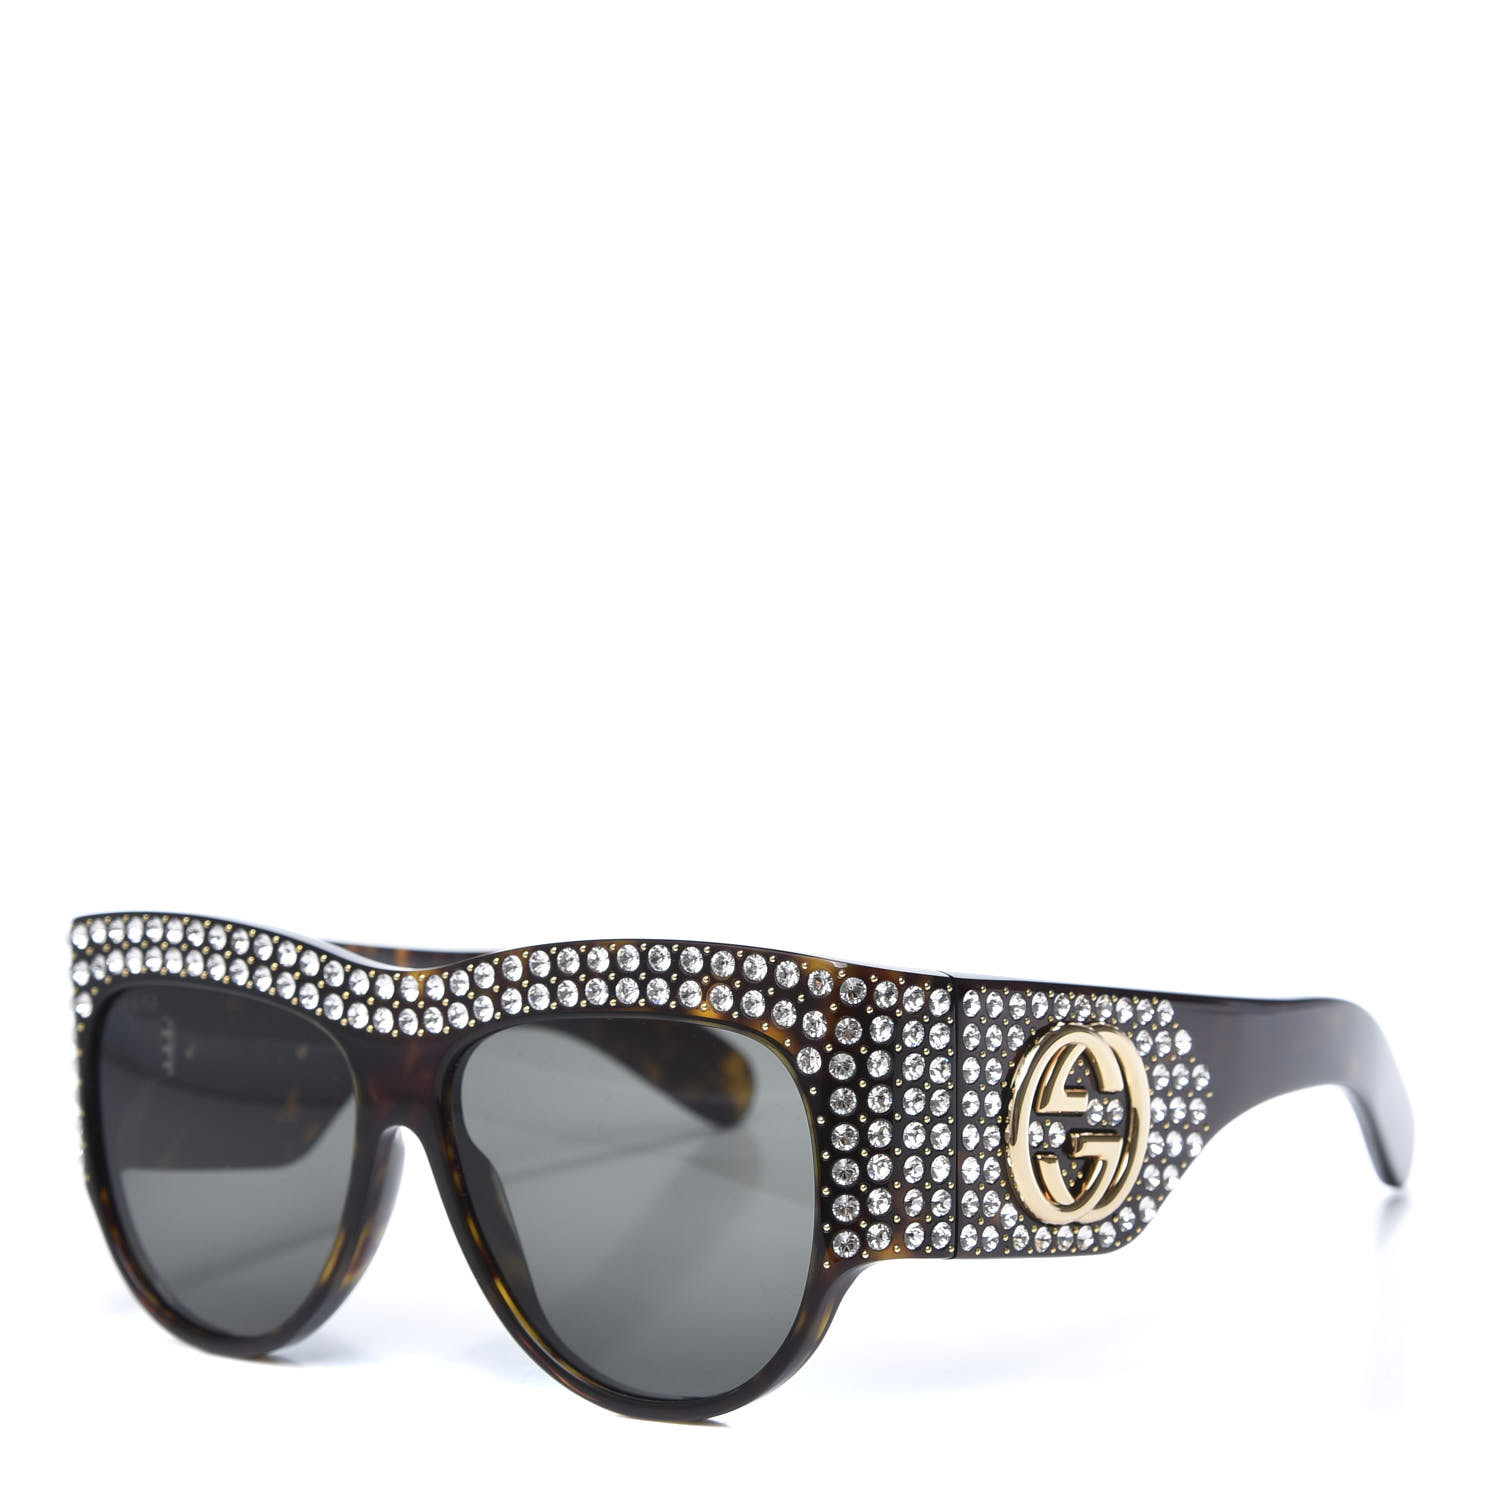 Gucci Acetate Crystal Oversize Hollywood Forever Sunglasses Gg0144s